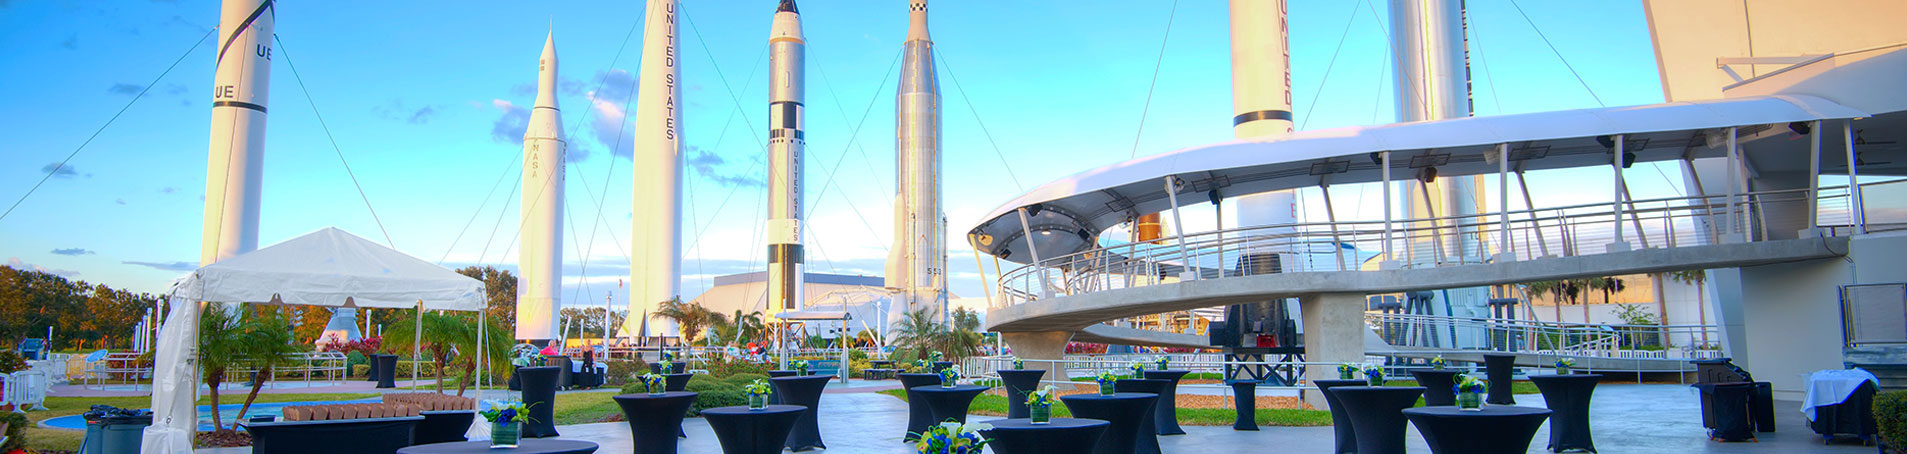 Enjoy an unique event experience at the Debus Conference Facility, with a stunning view of the Rocket Garden.